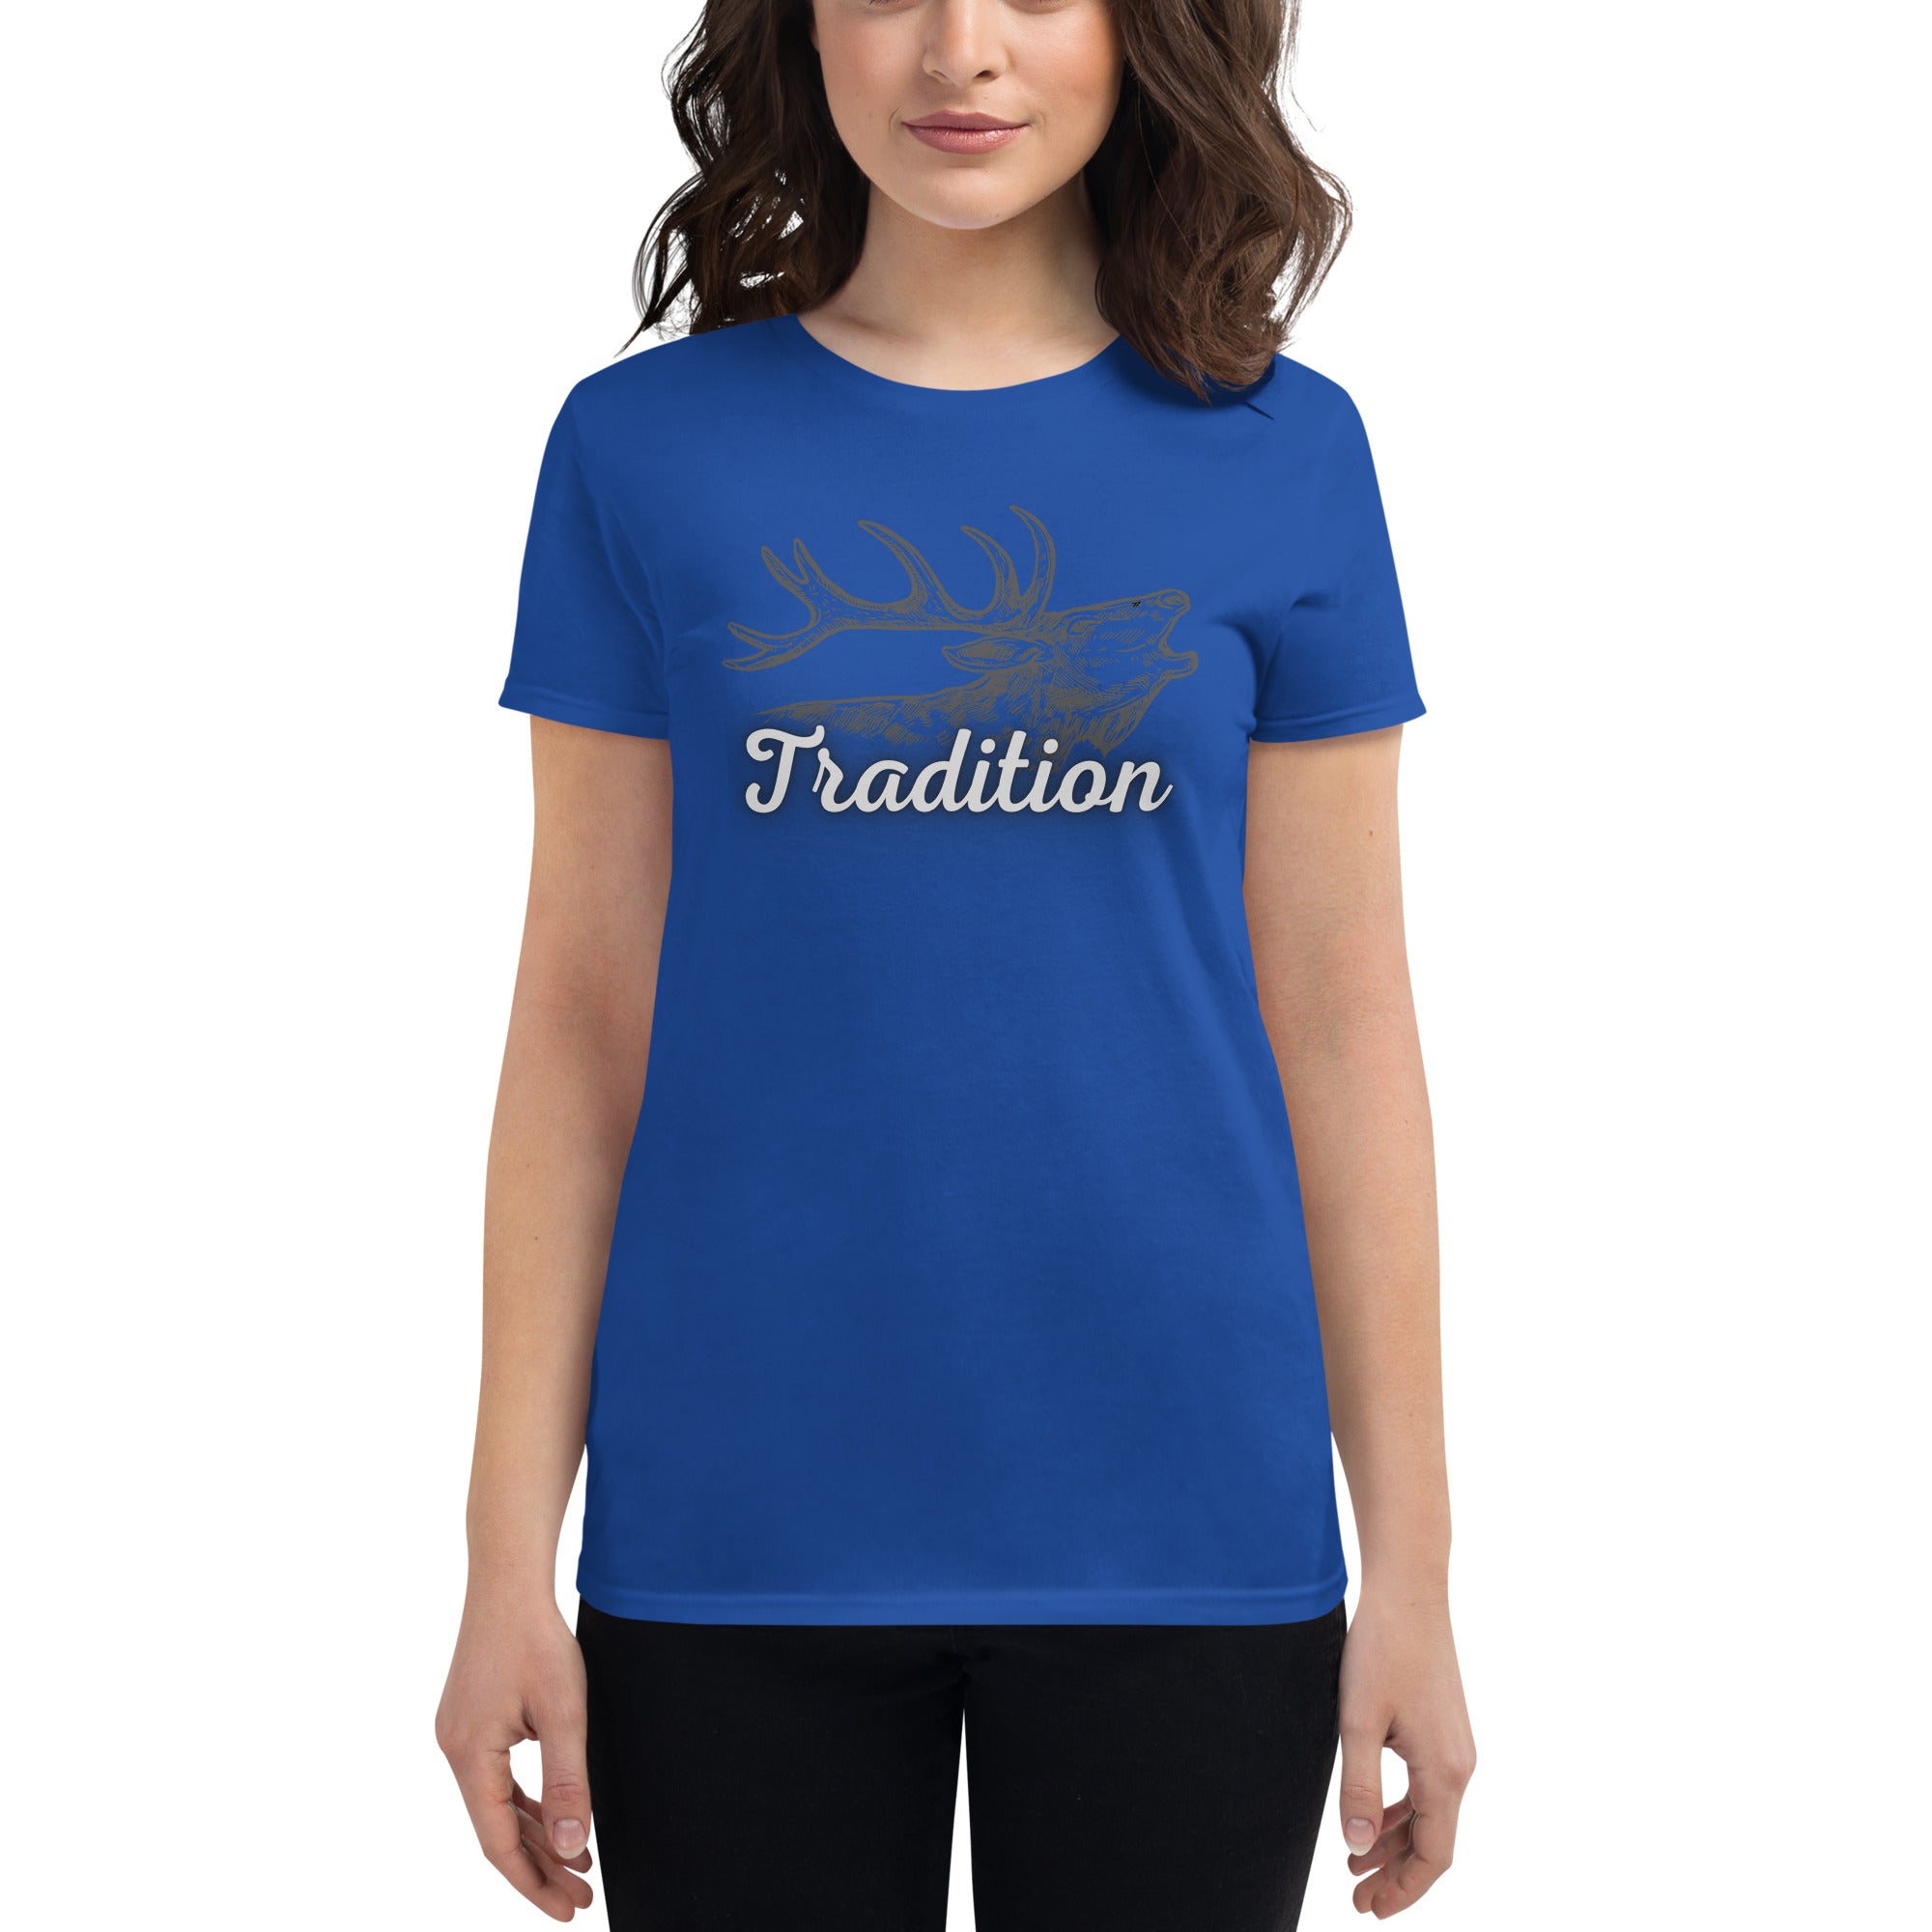 Tradition Women's Fitted T-Shirt